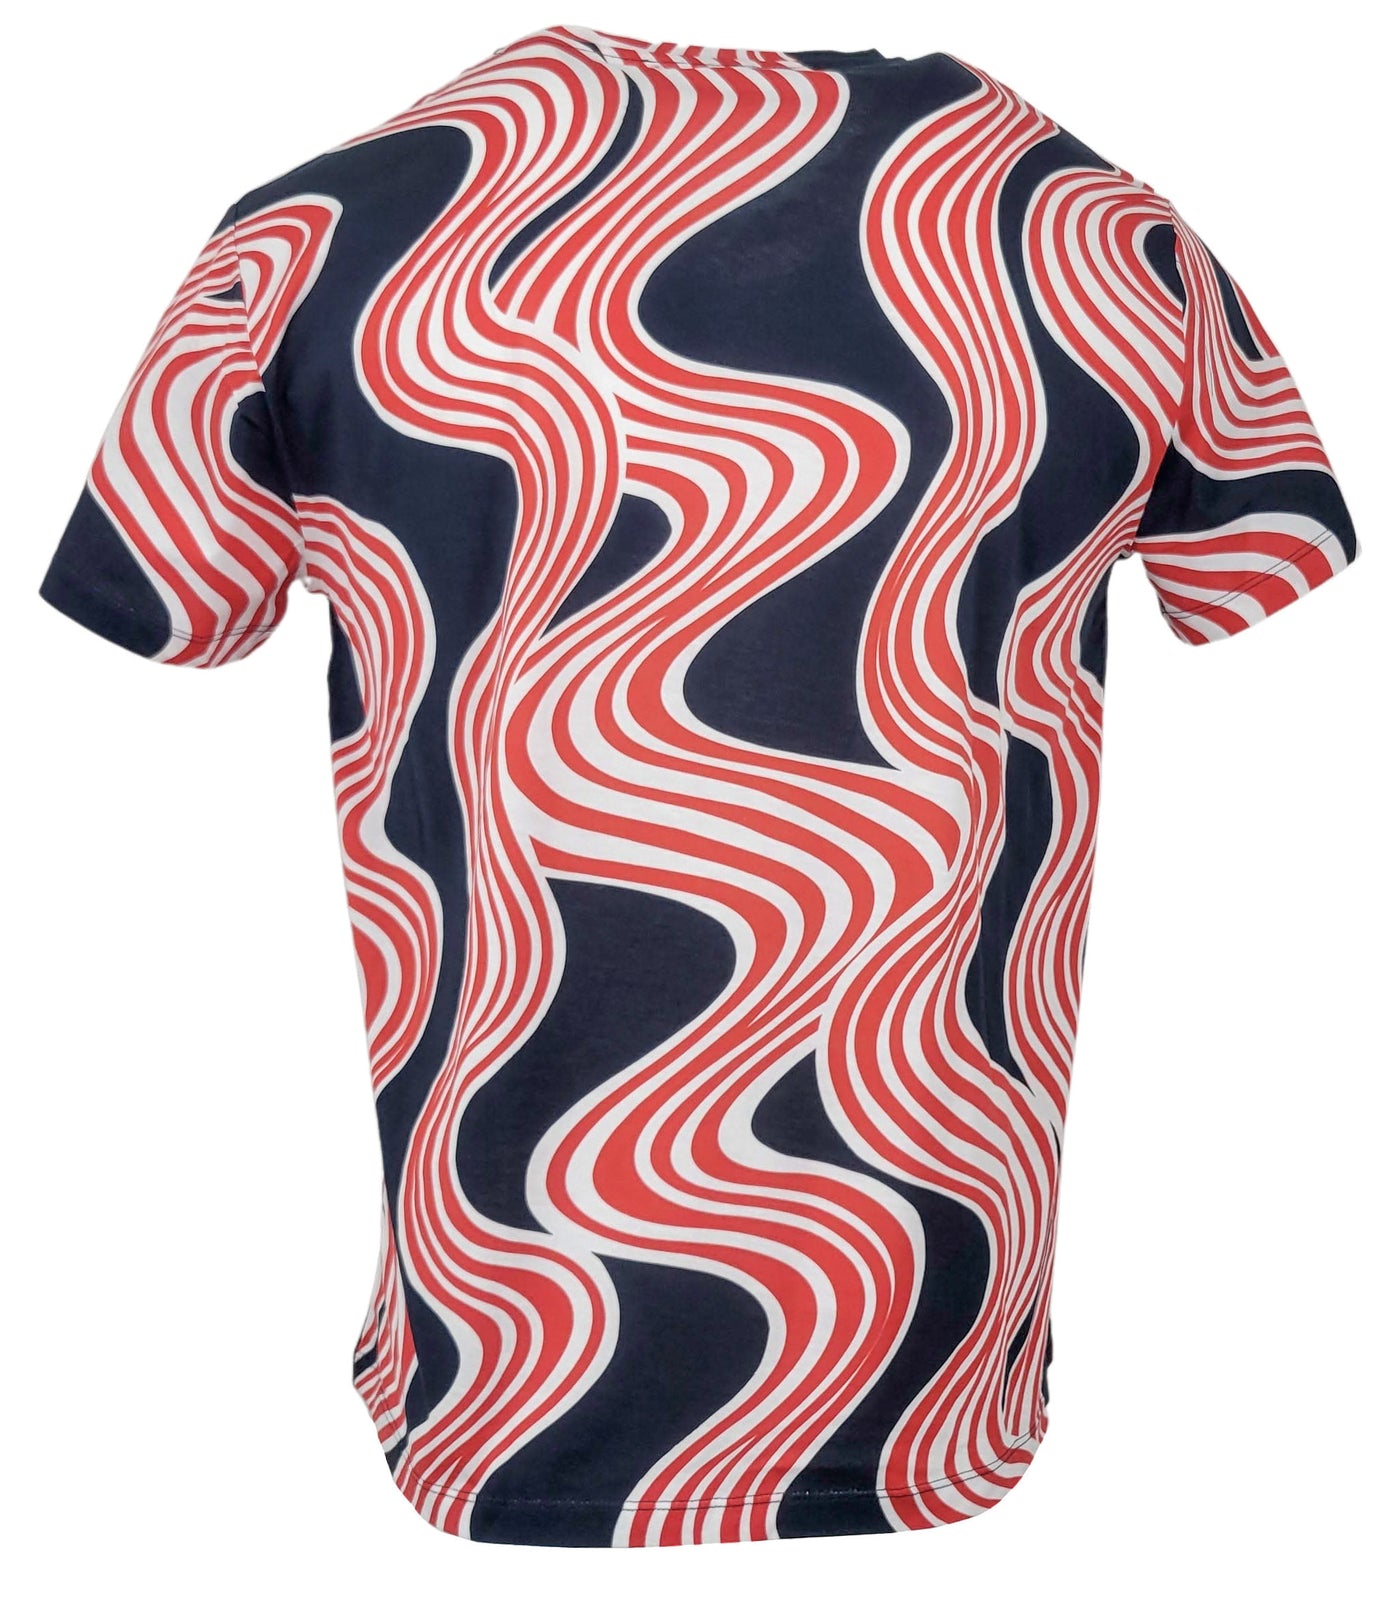 Raf Simons Scream Tee in in Navy/Red Print - Discounts on Raf Simons at UAL